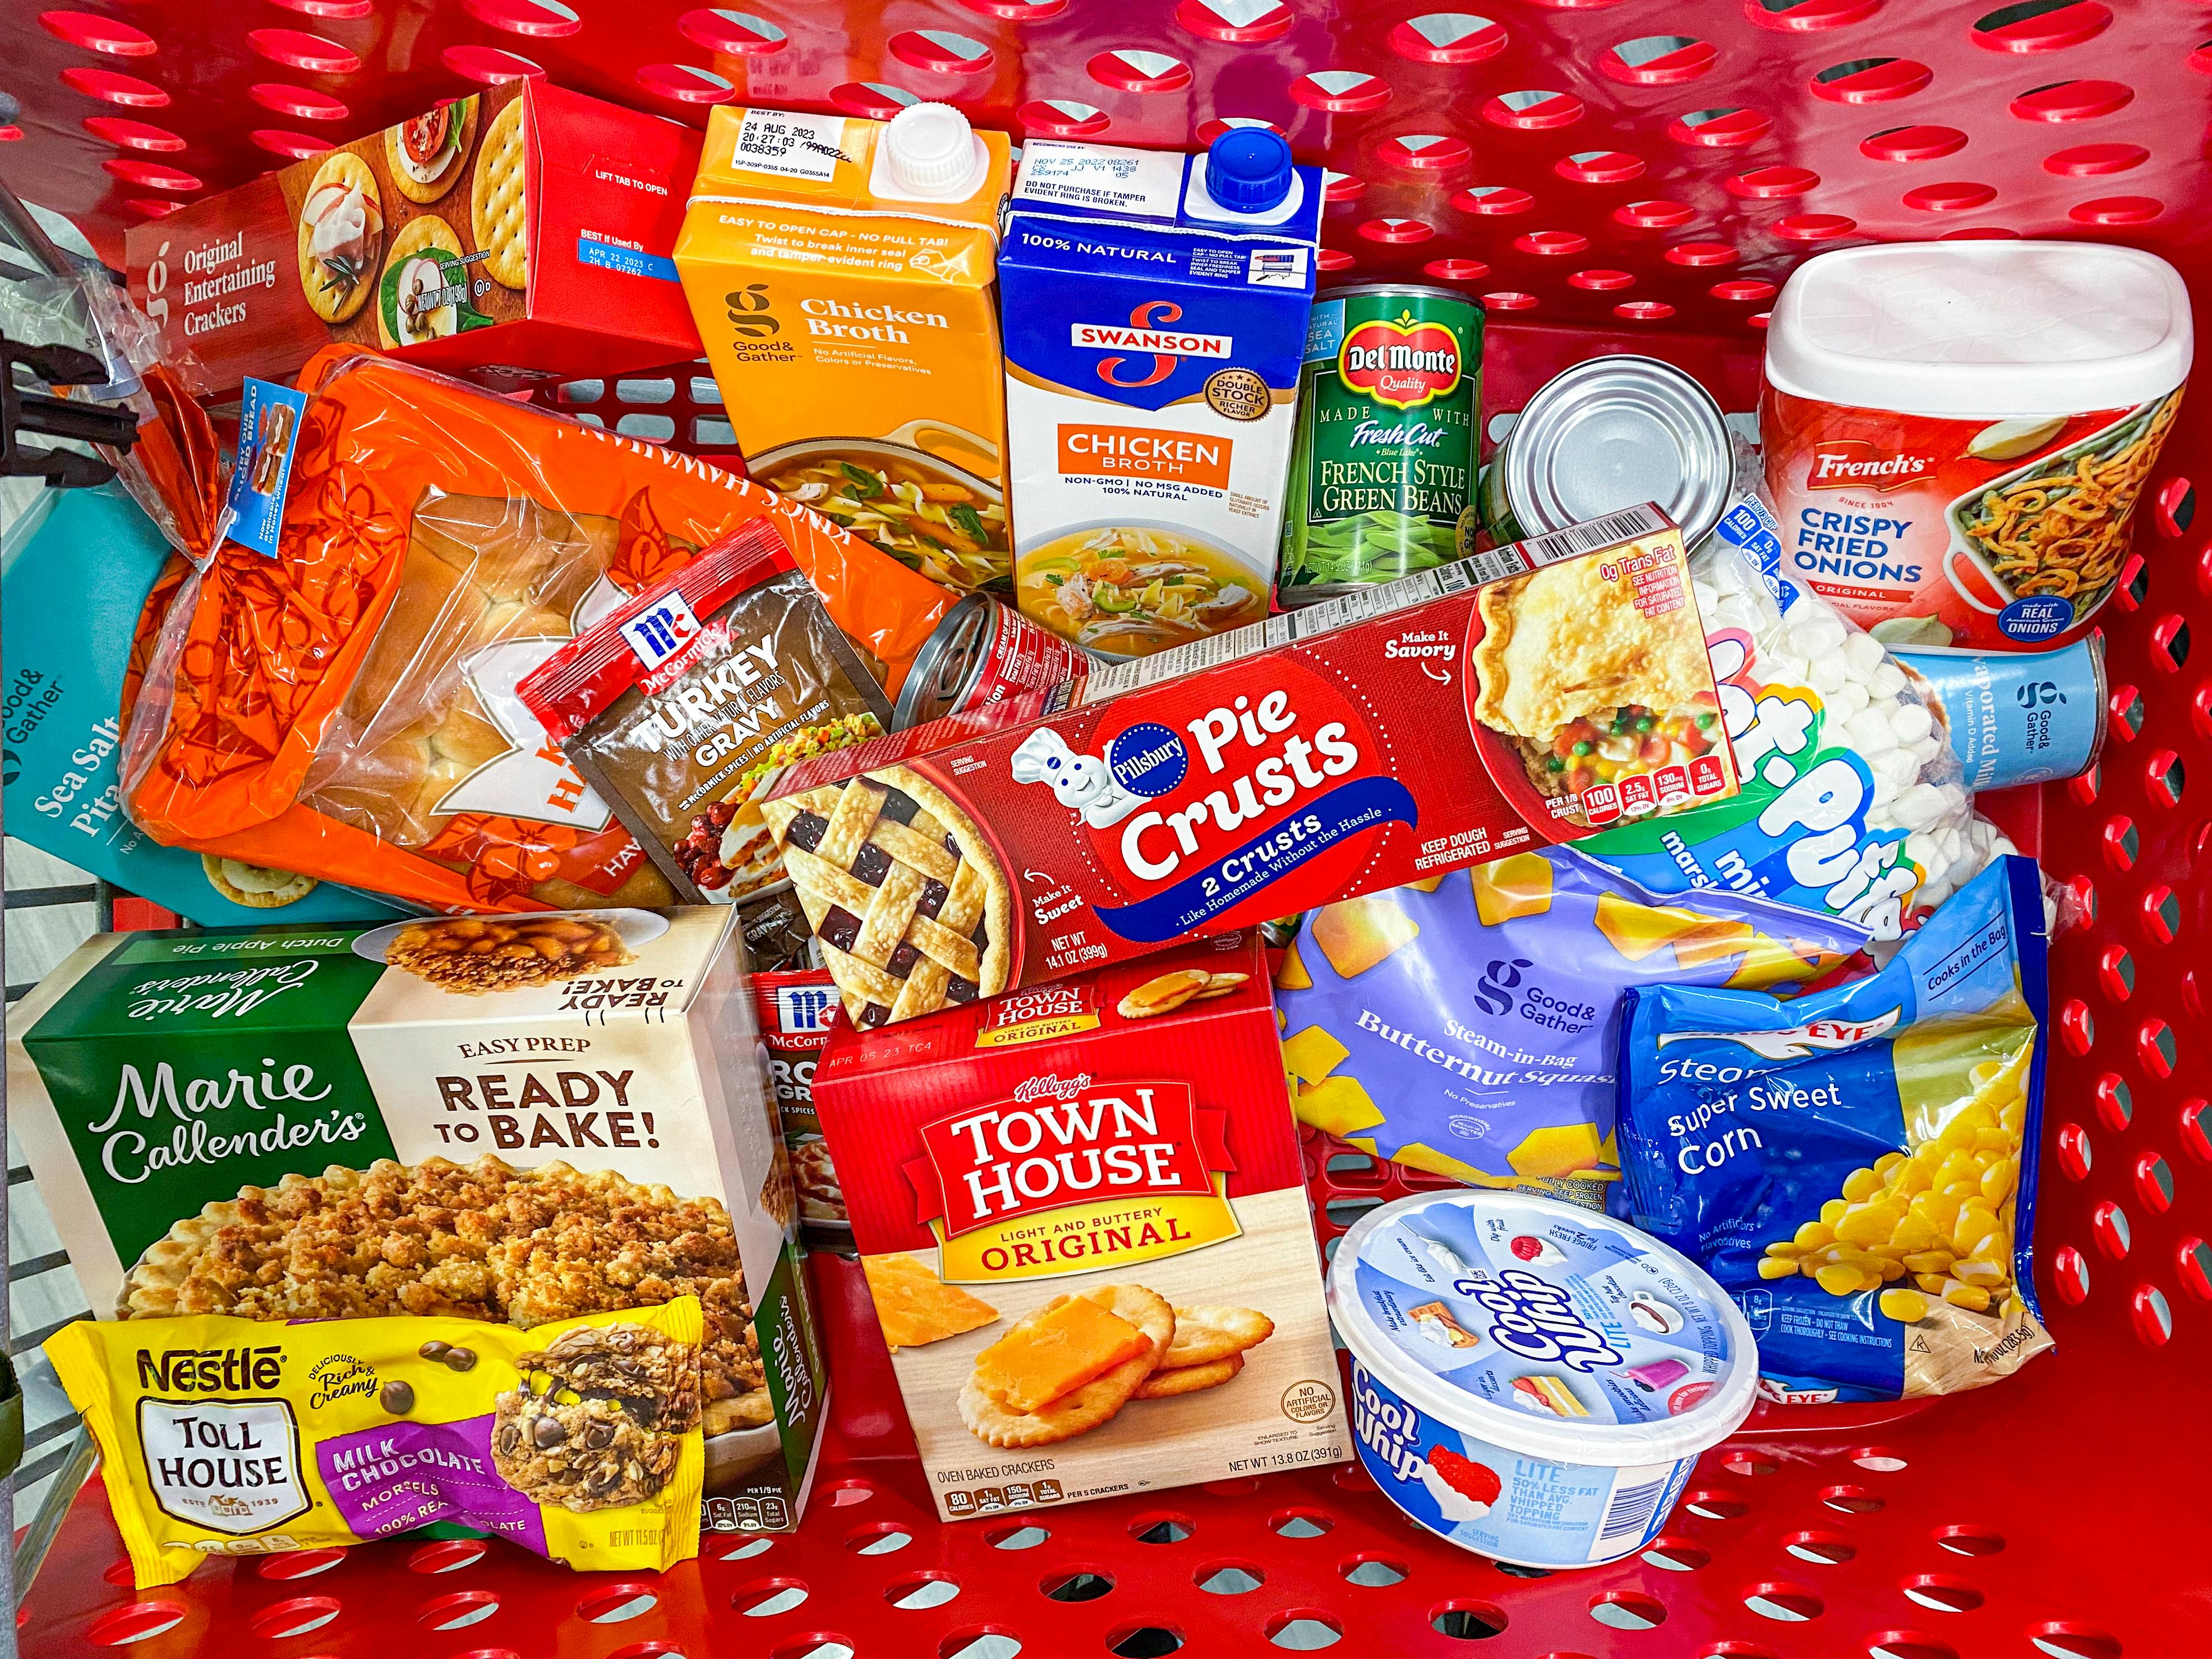 A target cart filled with groceries